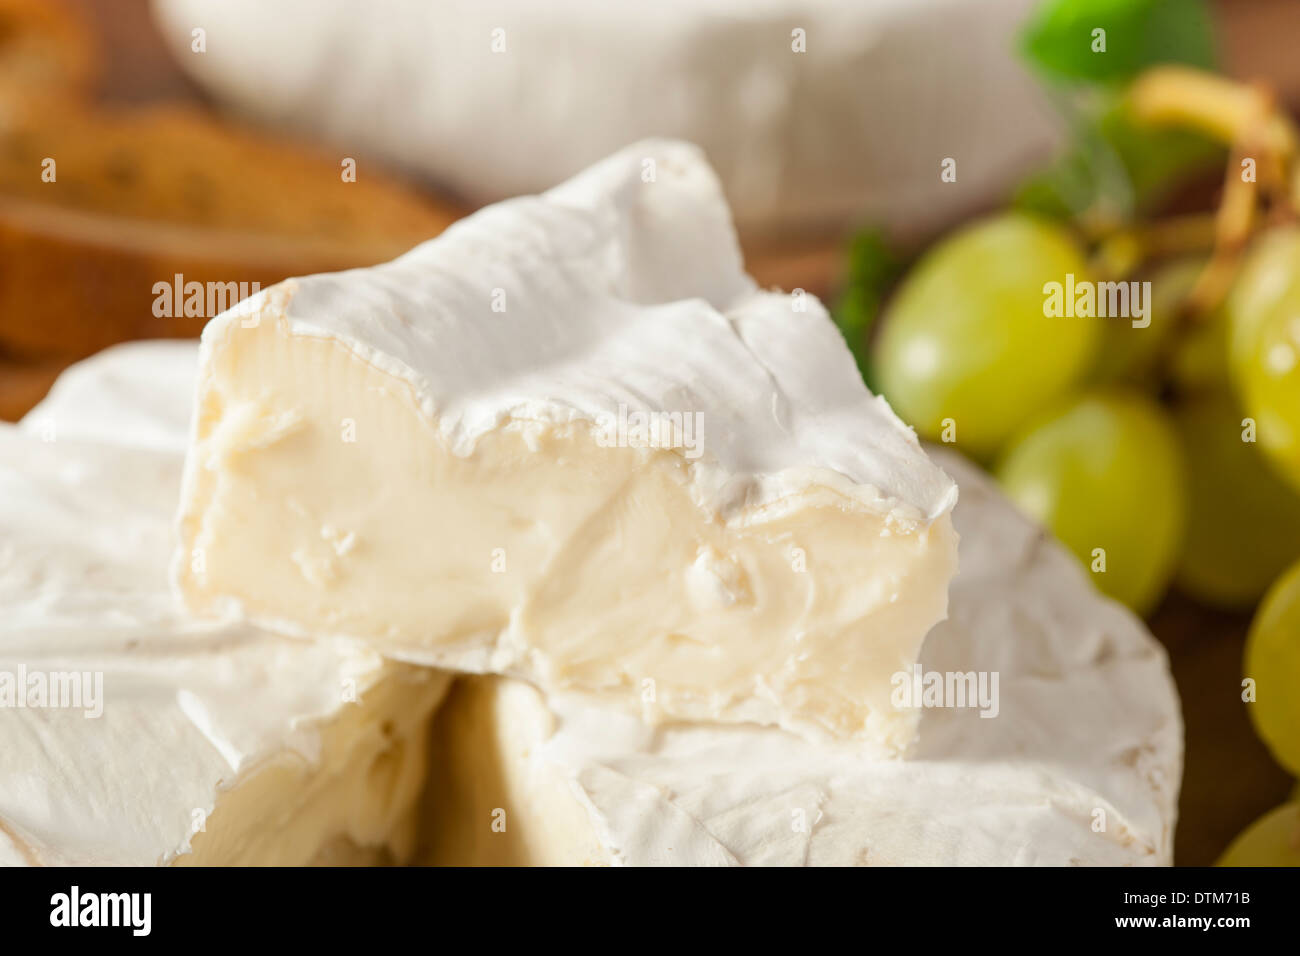 Organic Homemade White Brie Cheese with Bread and Grapes Stock Photo